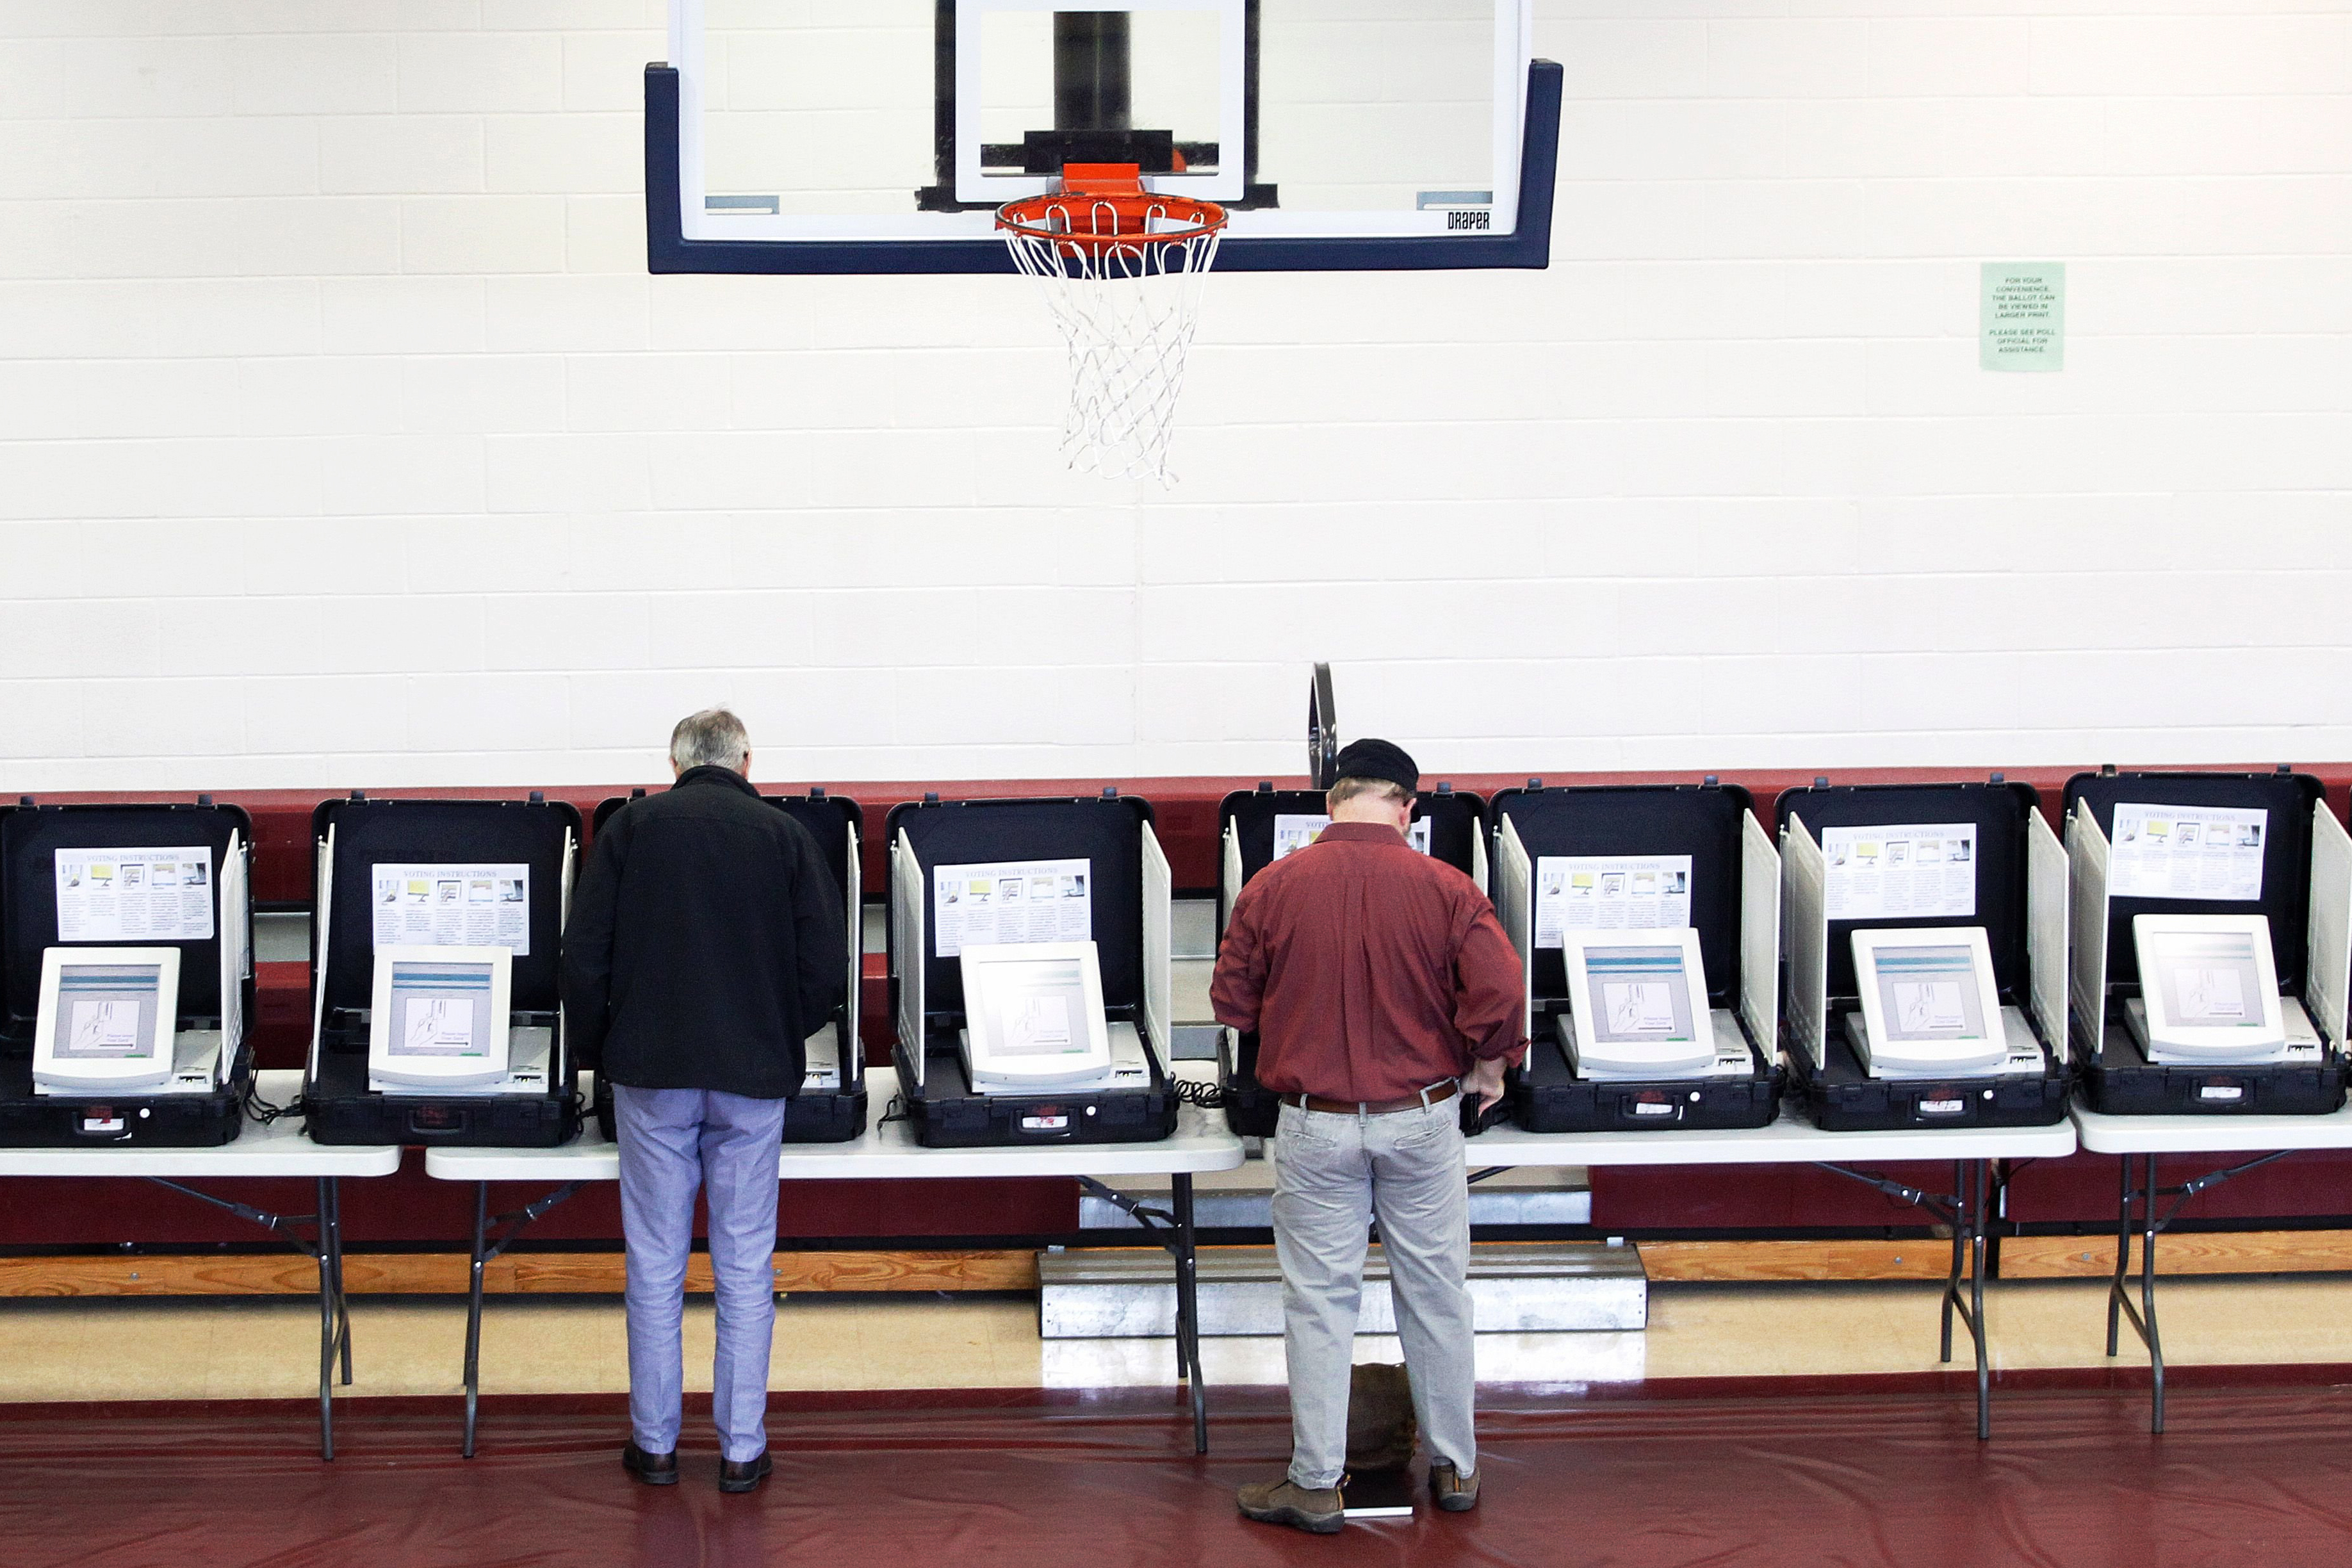 Voters place their ballots in the gymnasium at Saint Philip AME church on Super Tuesday in Atlanta. (Tami Chappell—AFP/Getty Images)